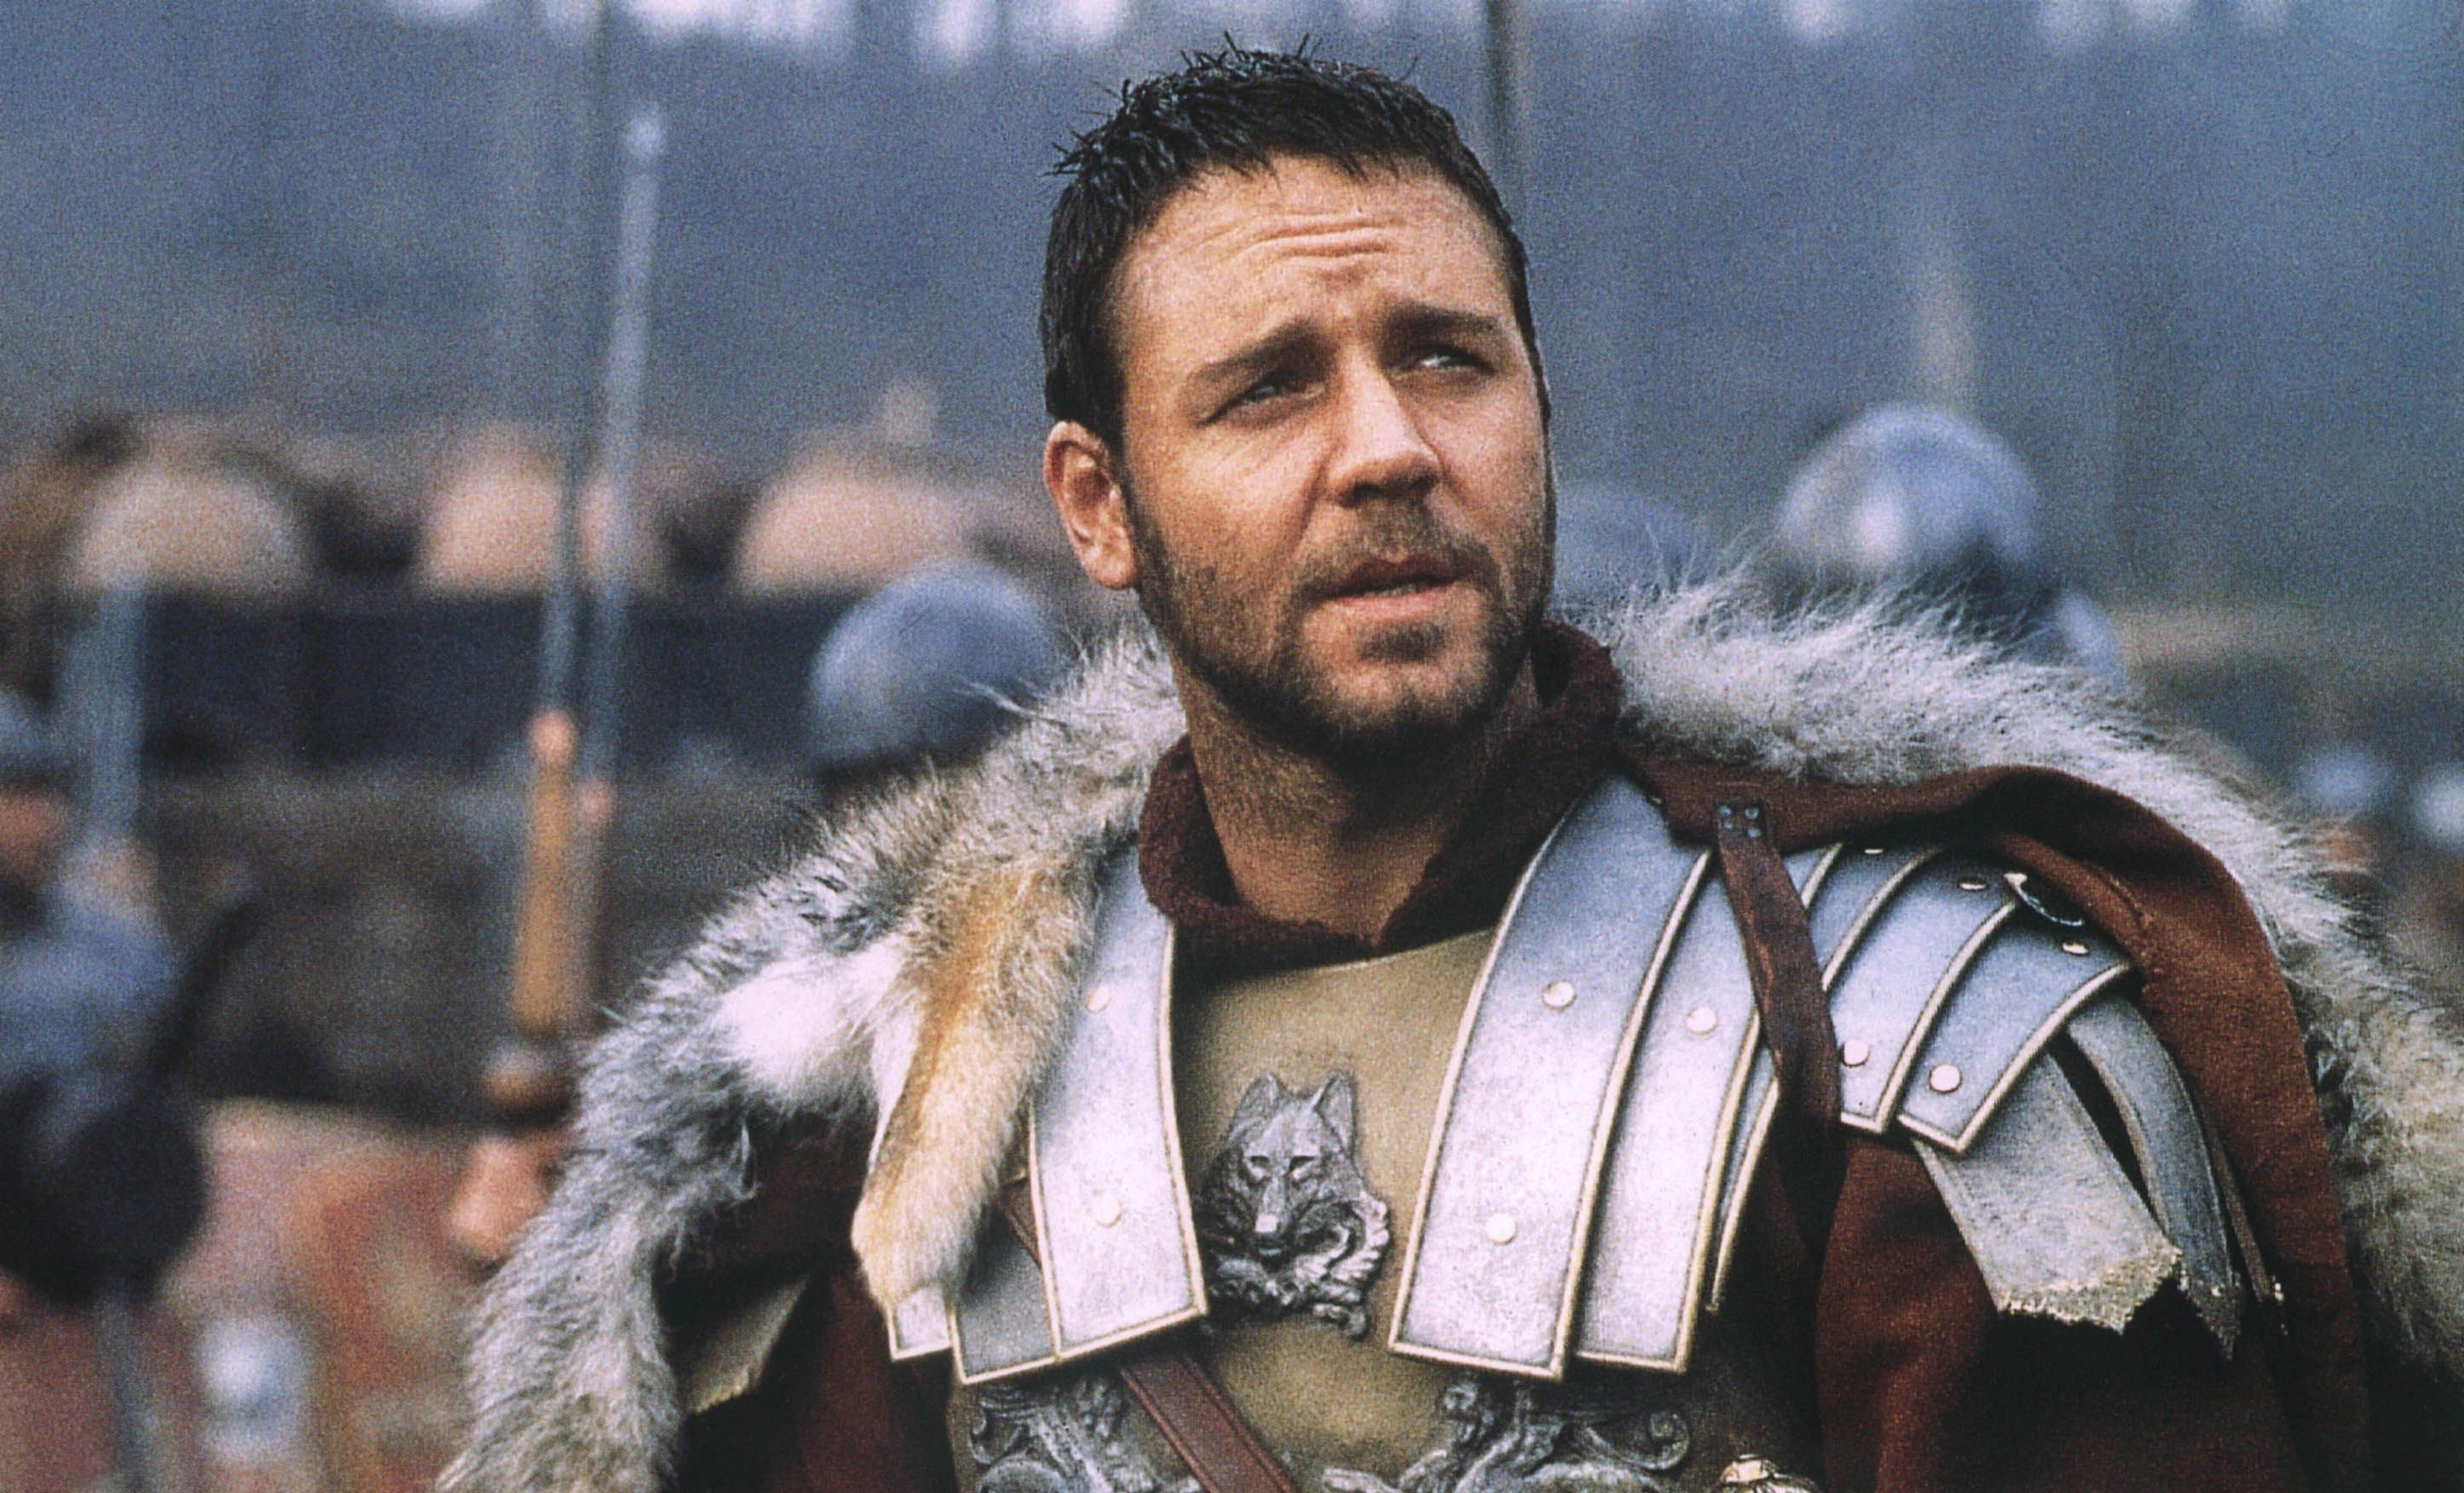 Russell Crowe - Gladiator